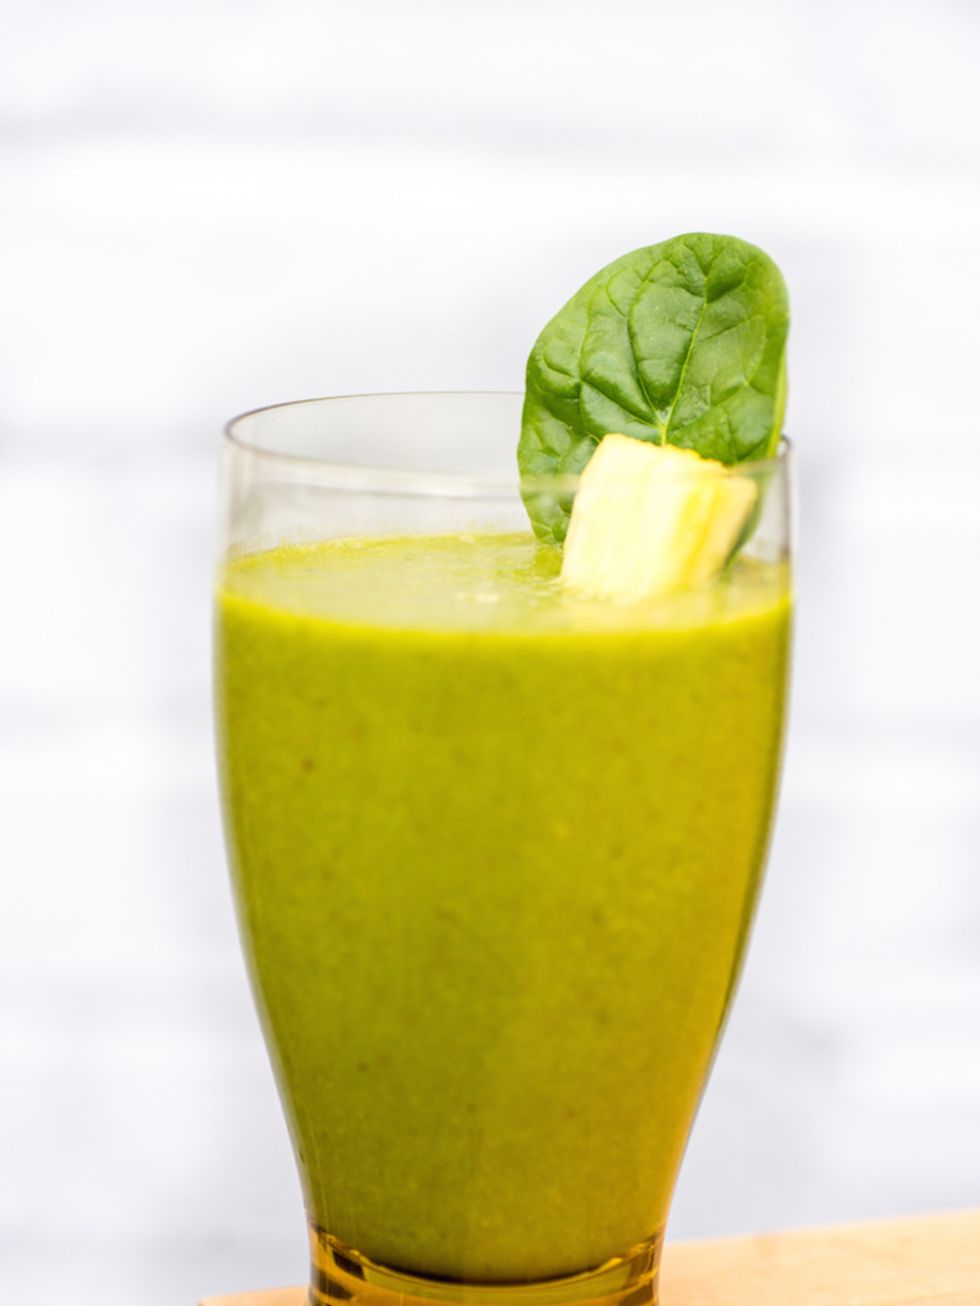 <p><strong>77K Shares</strong>. Water, spinach, romaine lettuce, lemon, celery, banana, pear and apple. This is the most shared smoothie on our list, from <a href="http://kimberlysnyder.com/blog/ggs/">Kimberly Snyder</a>, and promises to keep your skin ce